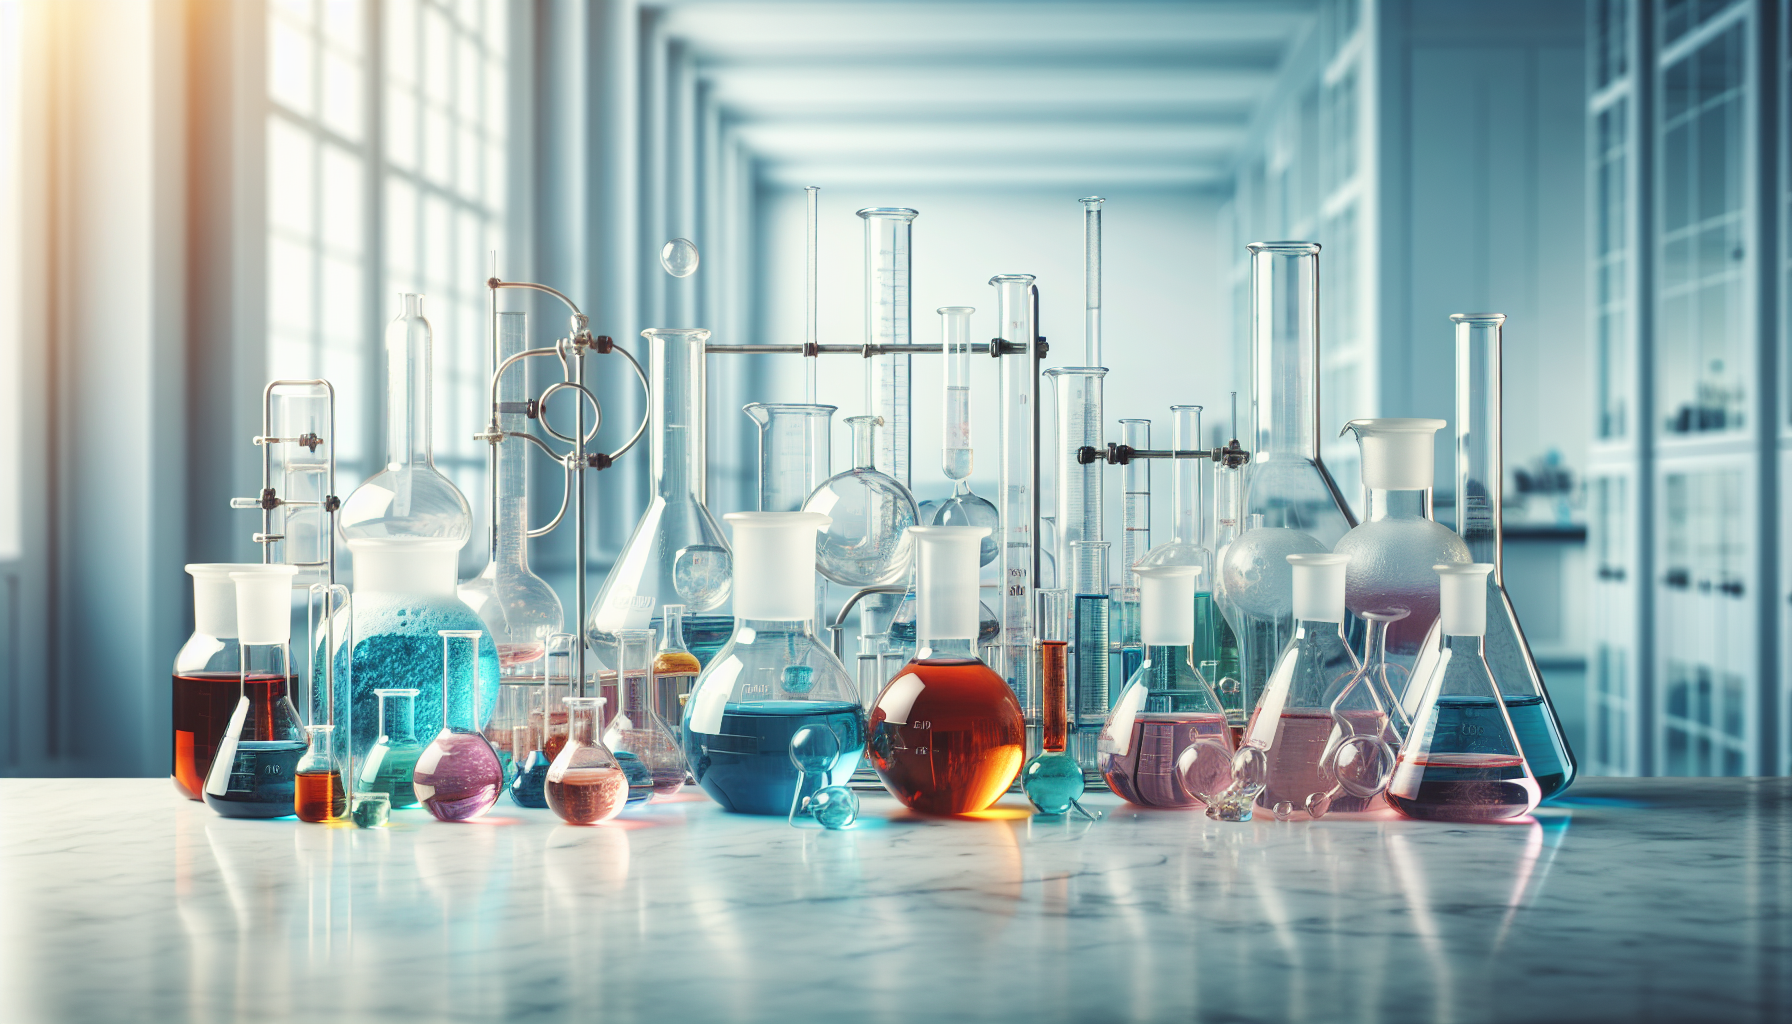 Various types of laboratory glassware including beakers, flasks, bottles, and graduated cylinders